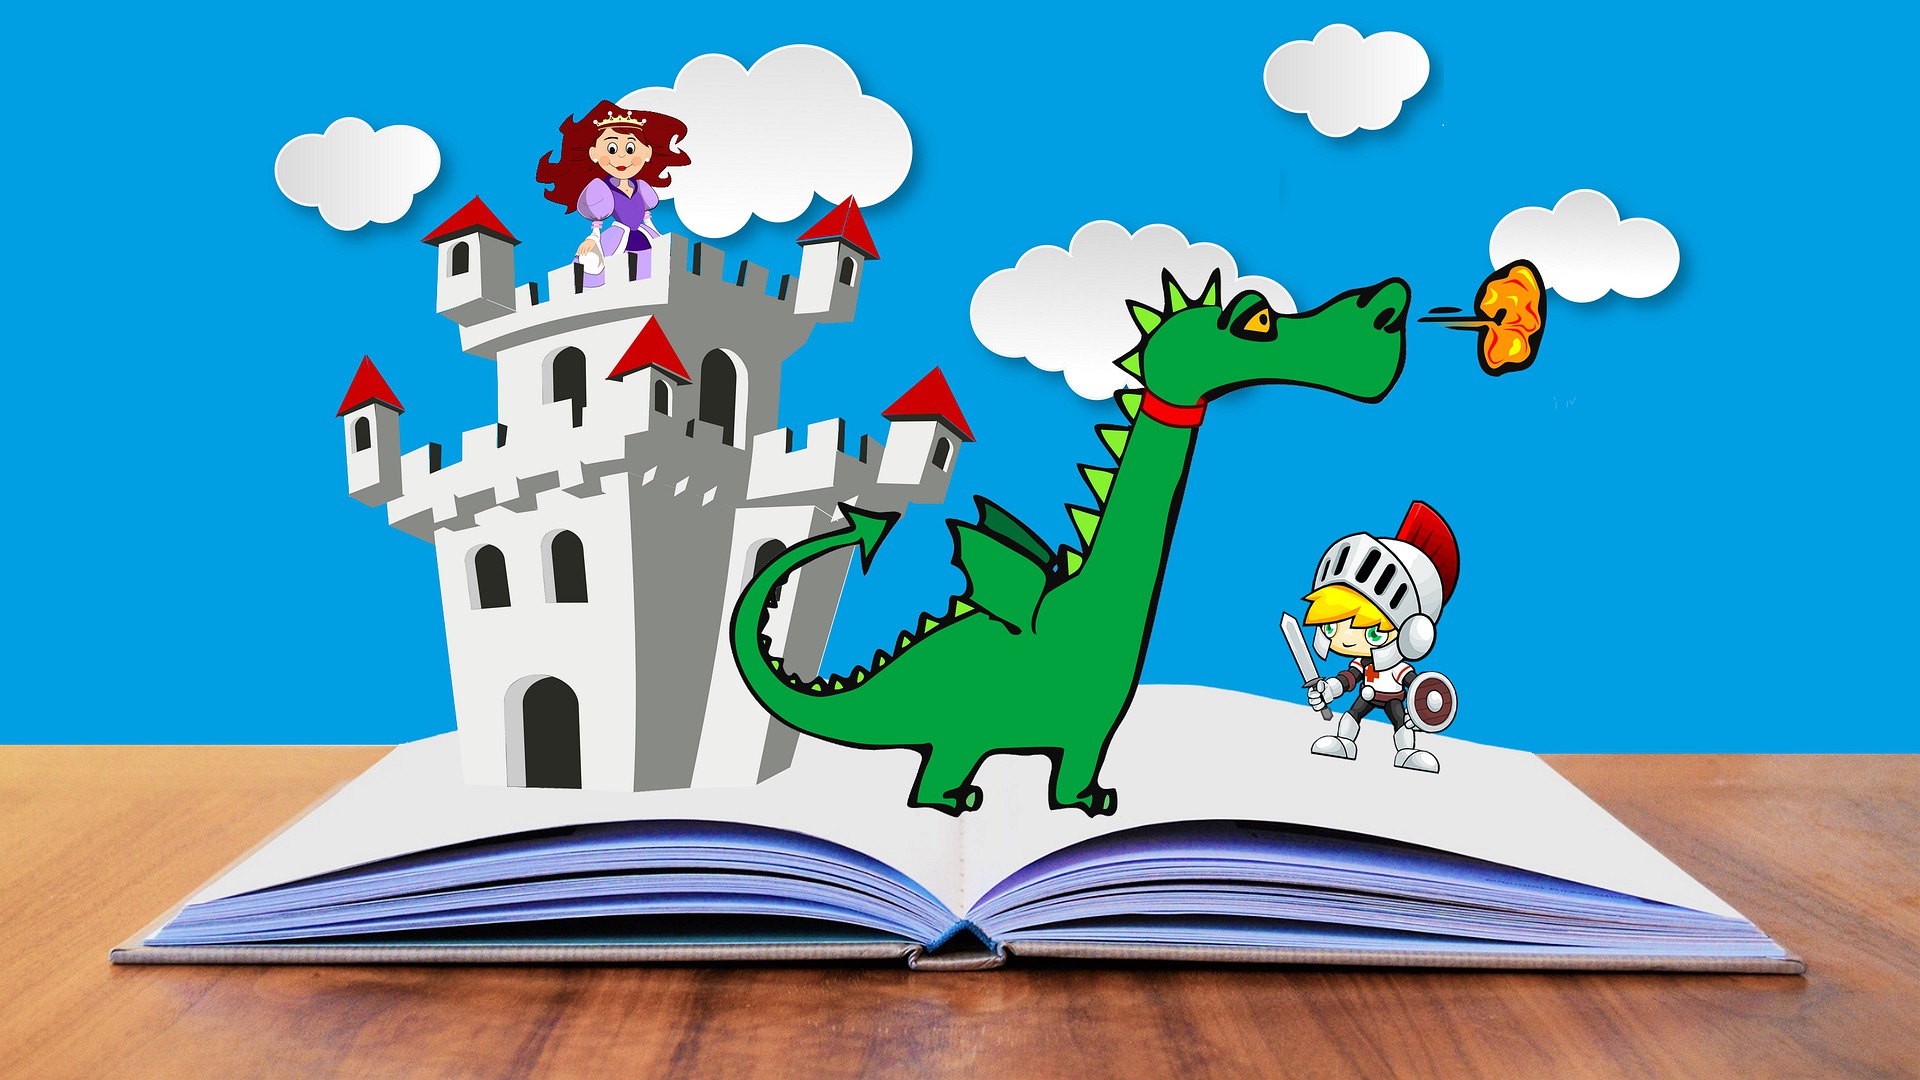 Dragon on a Story book